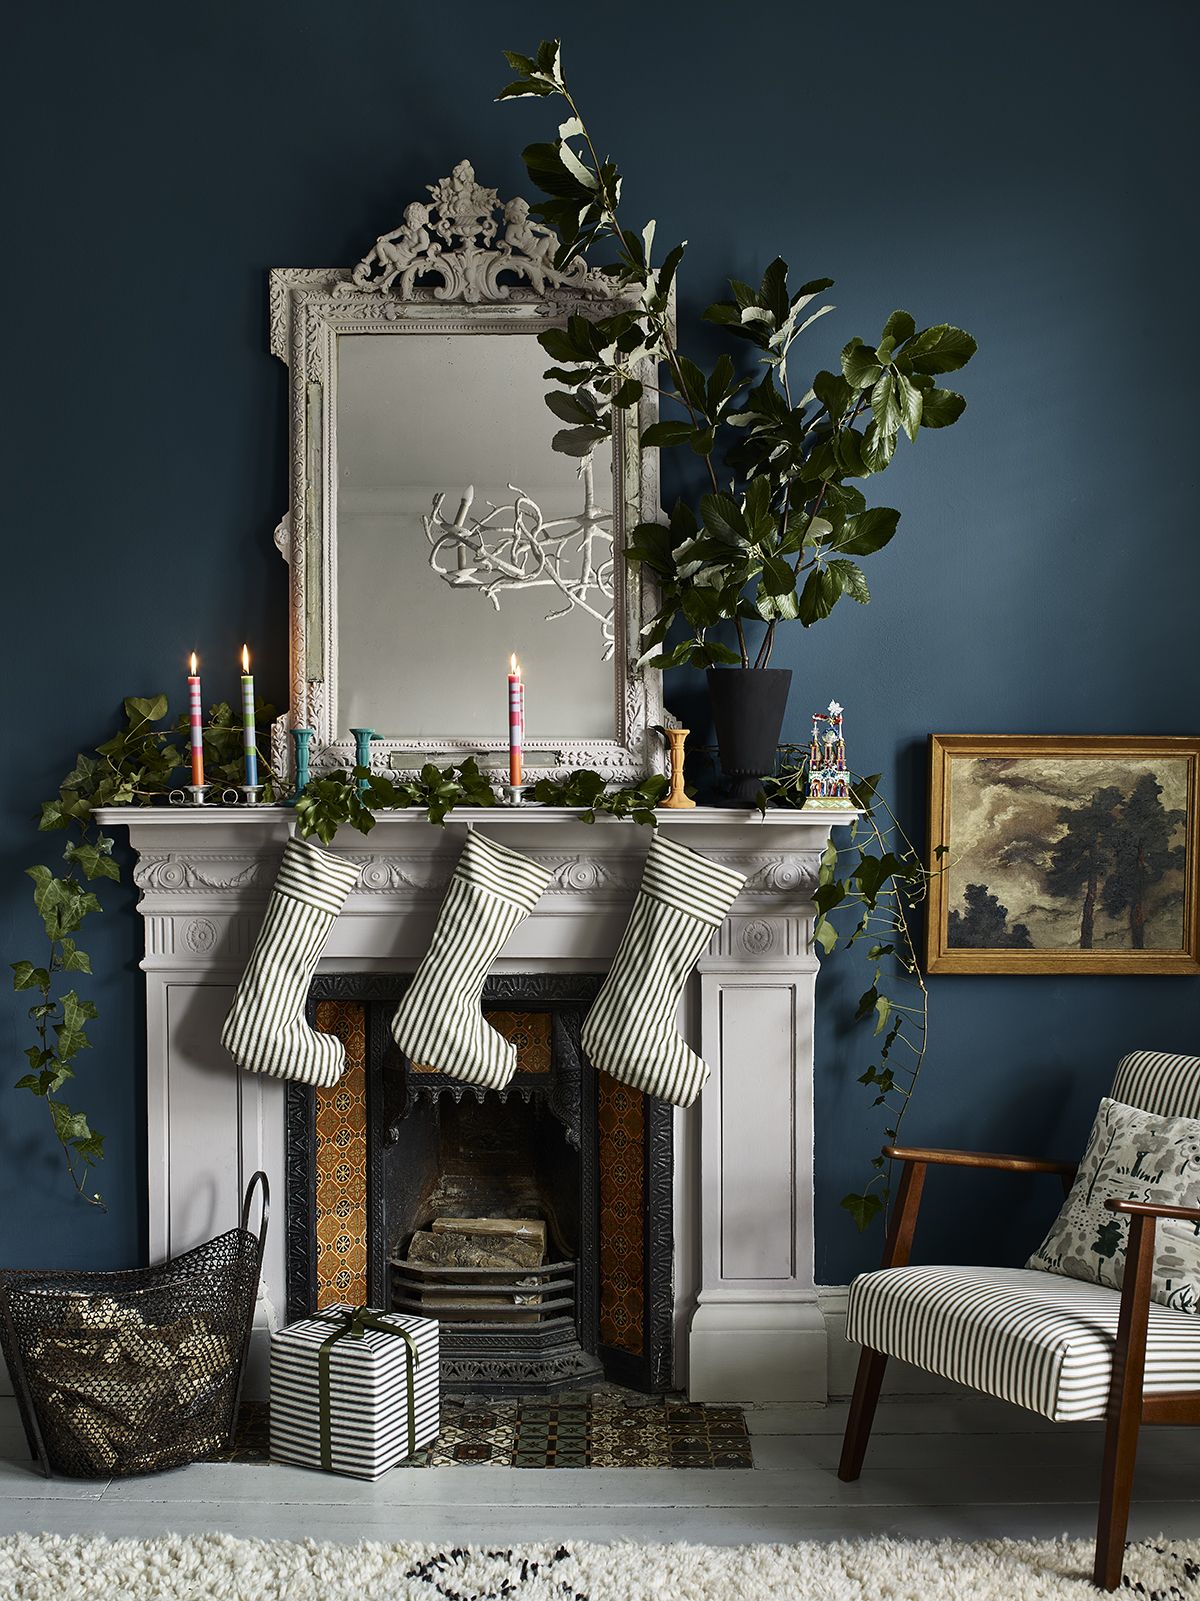 Christmas decorating ideas – 39 ways to style a festive home